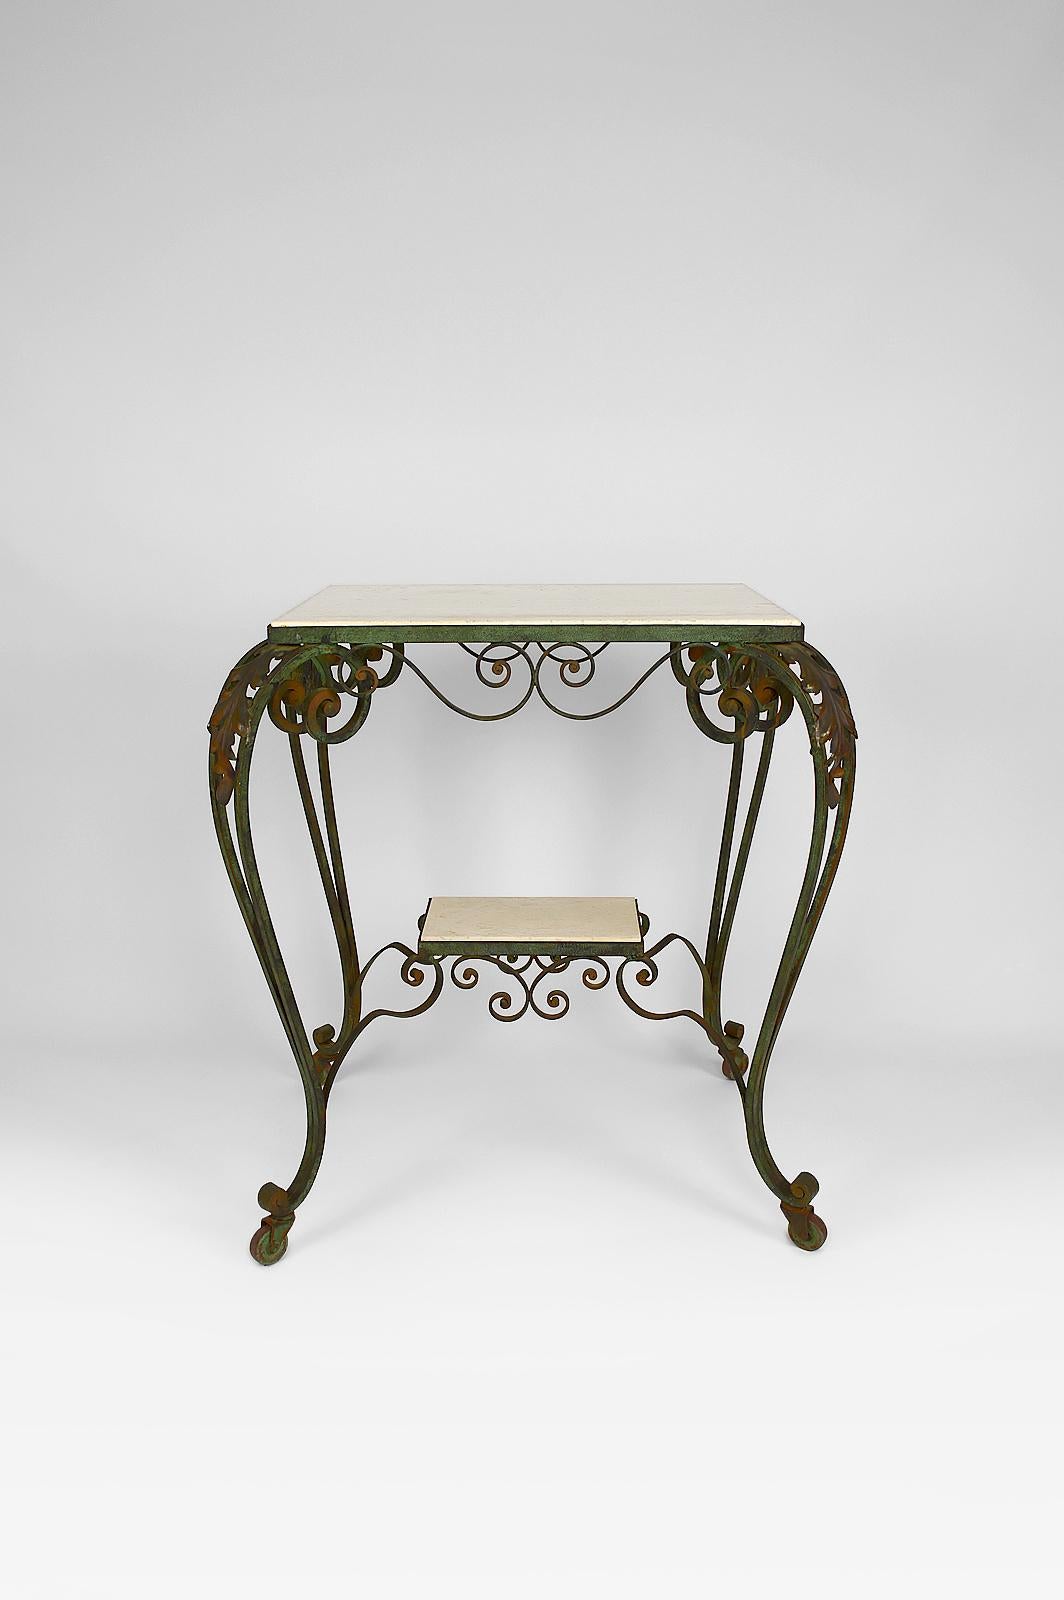 French Art Deco Rolling Service Table in Wrought Iron and Travertine, France, 1940s For Sale